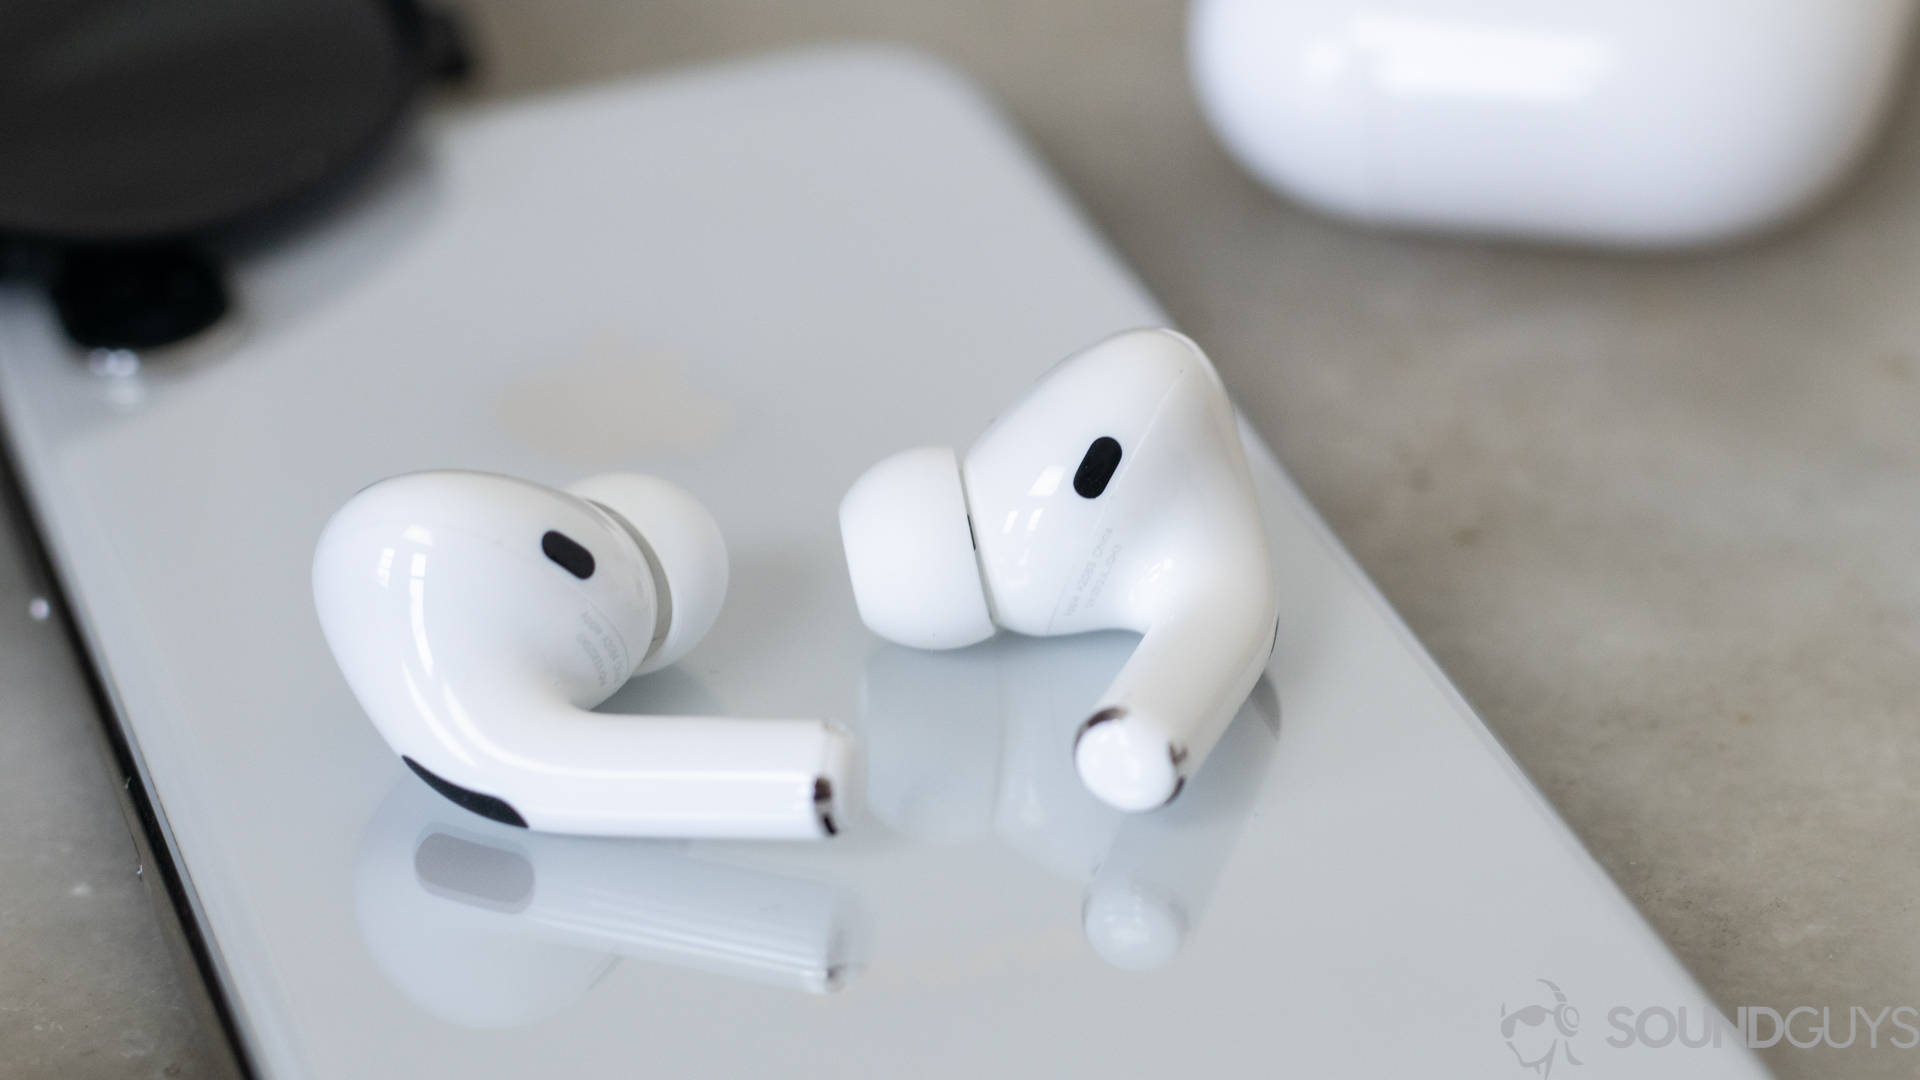 A picture of the Apple AirPods Pro on a white smartphone.